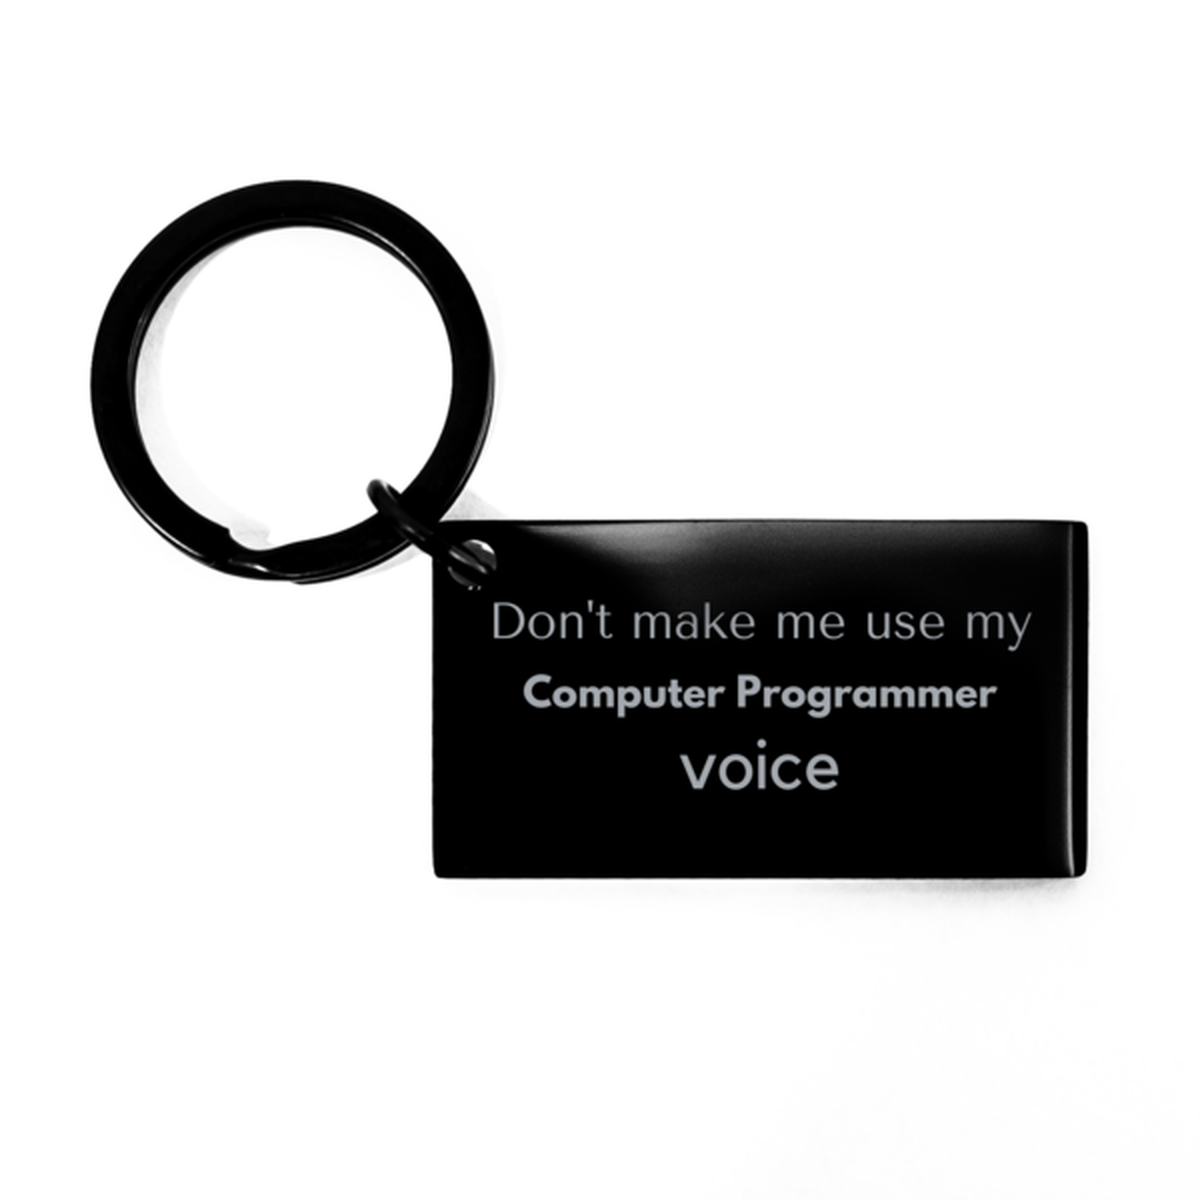 Don't make me use my Computer Programmer voice, Sarcasm Computer Programmer Gifts, Christmas Computer Programmer Keychain Birthday Unique Gifts For Computer Programmer Coworkers, Men, Women, Colleague, Friends